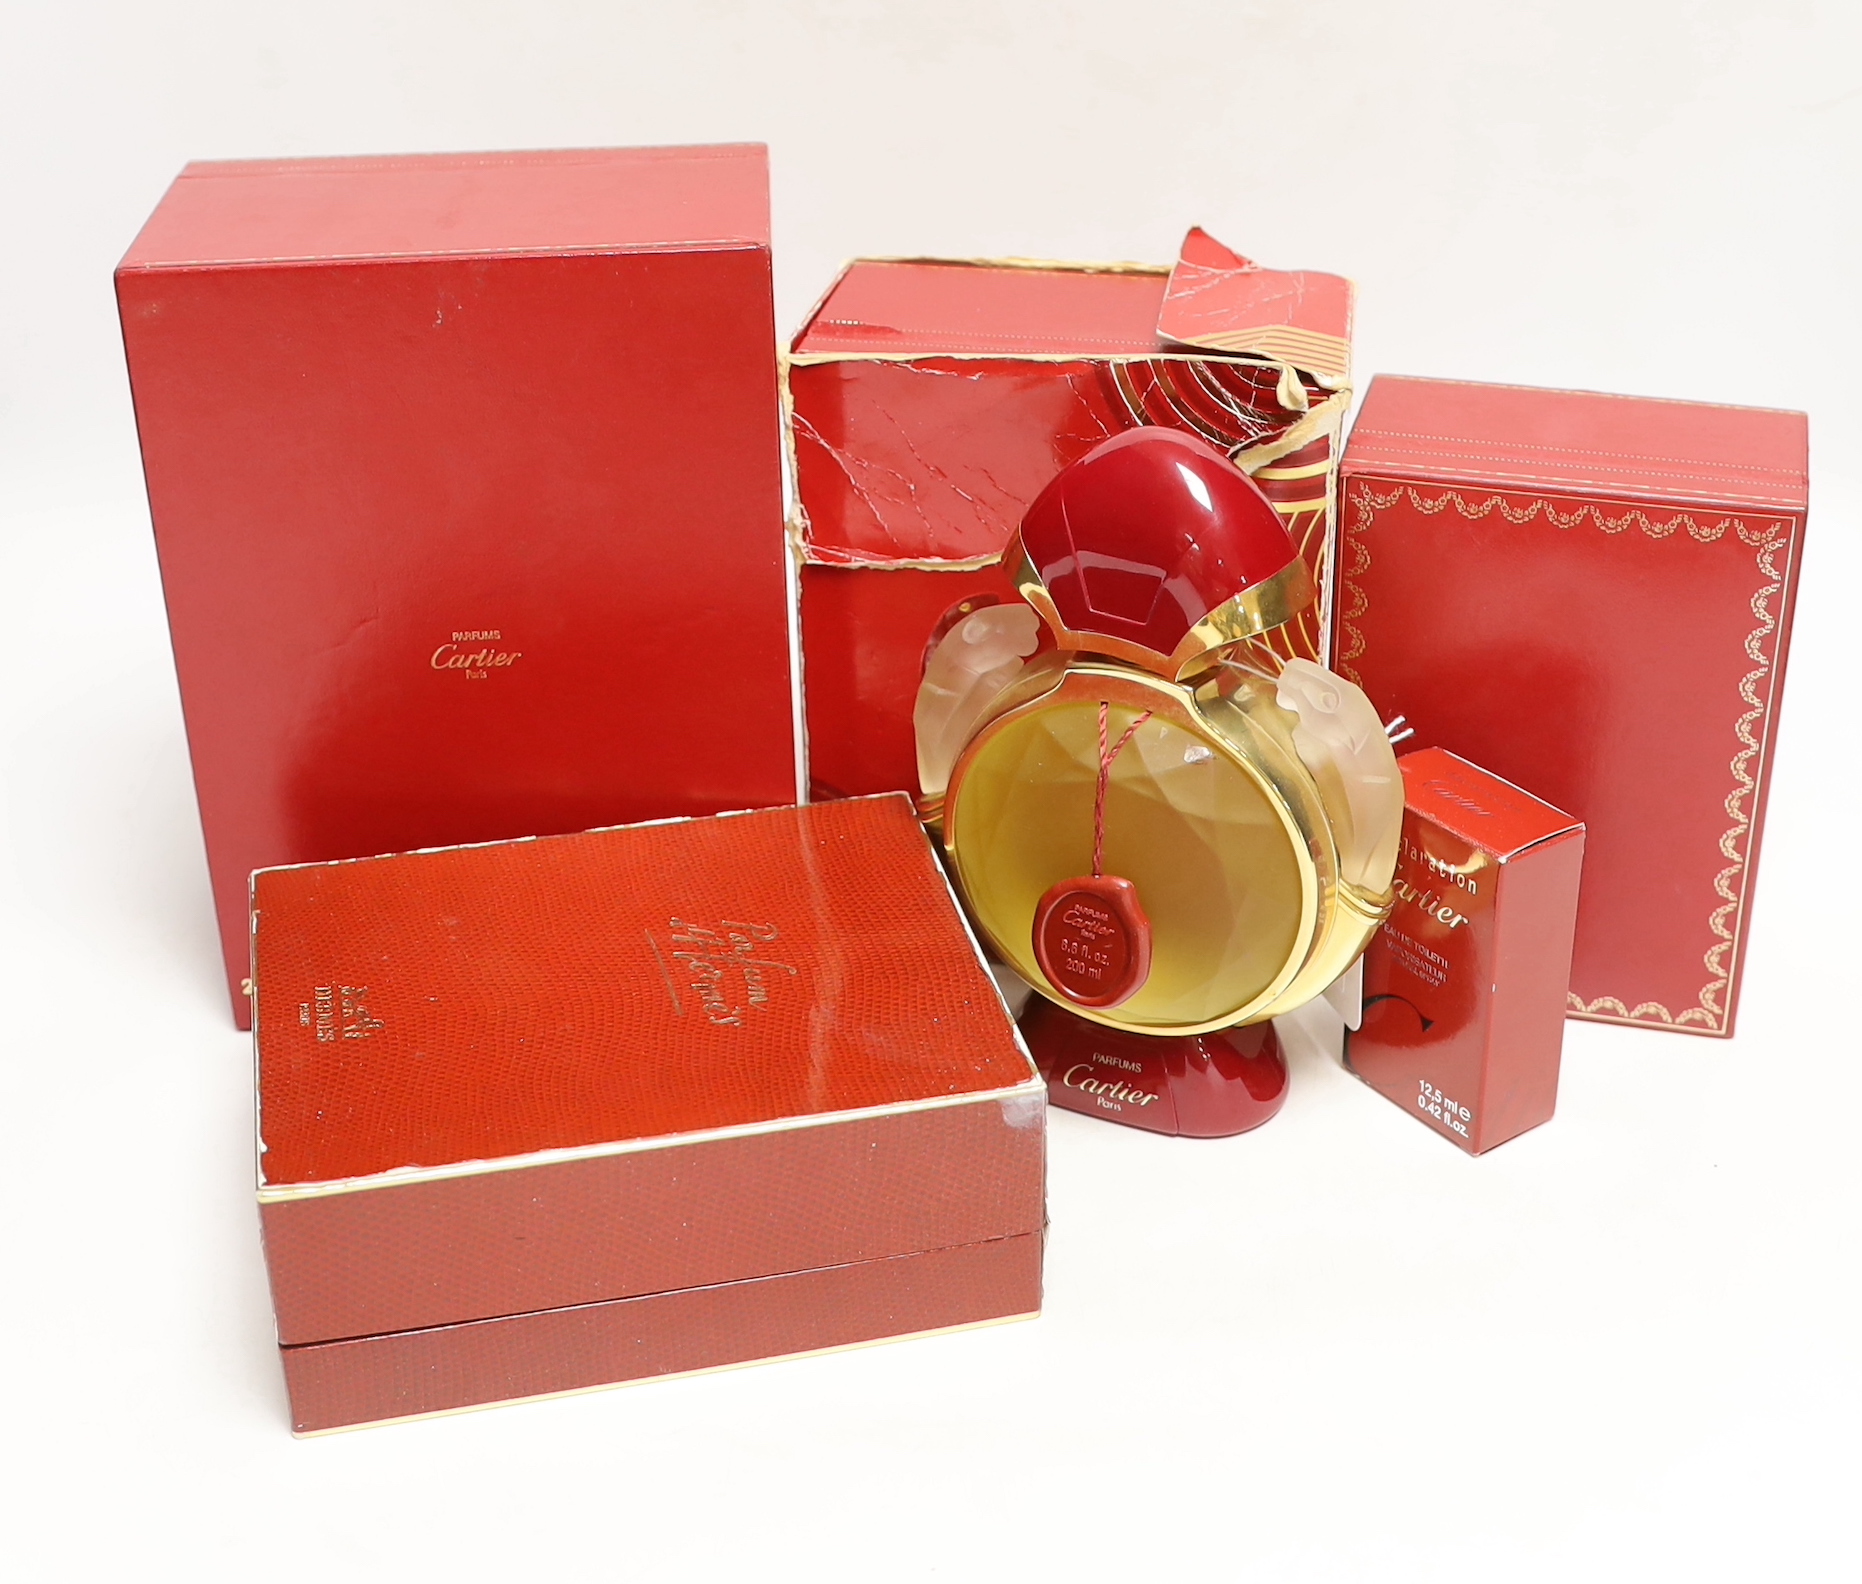 Four bottles of Cartier ‘Panthere’ perfume (three boxed boxed) plus a small bottle of Cartier eat de toilette, and a boxed bottle of Hermes, Paris perfume.